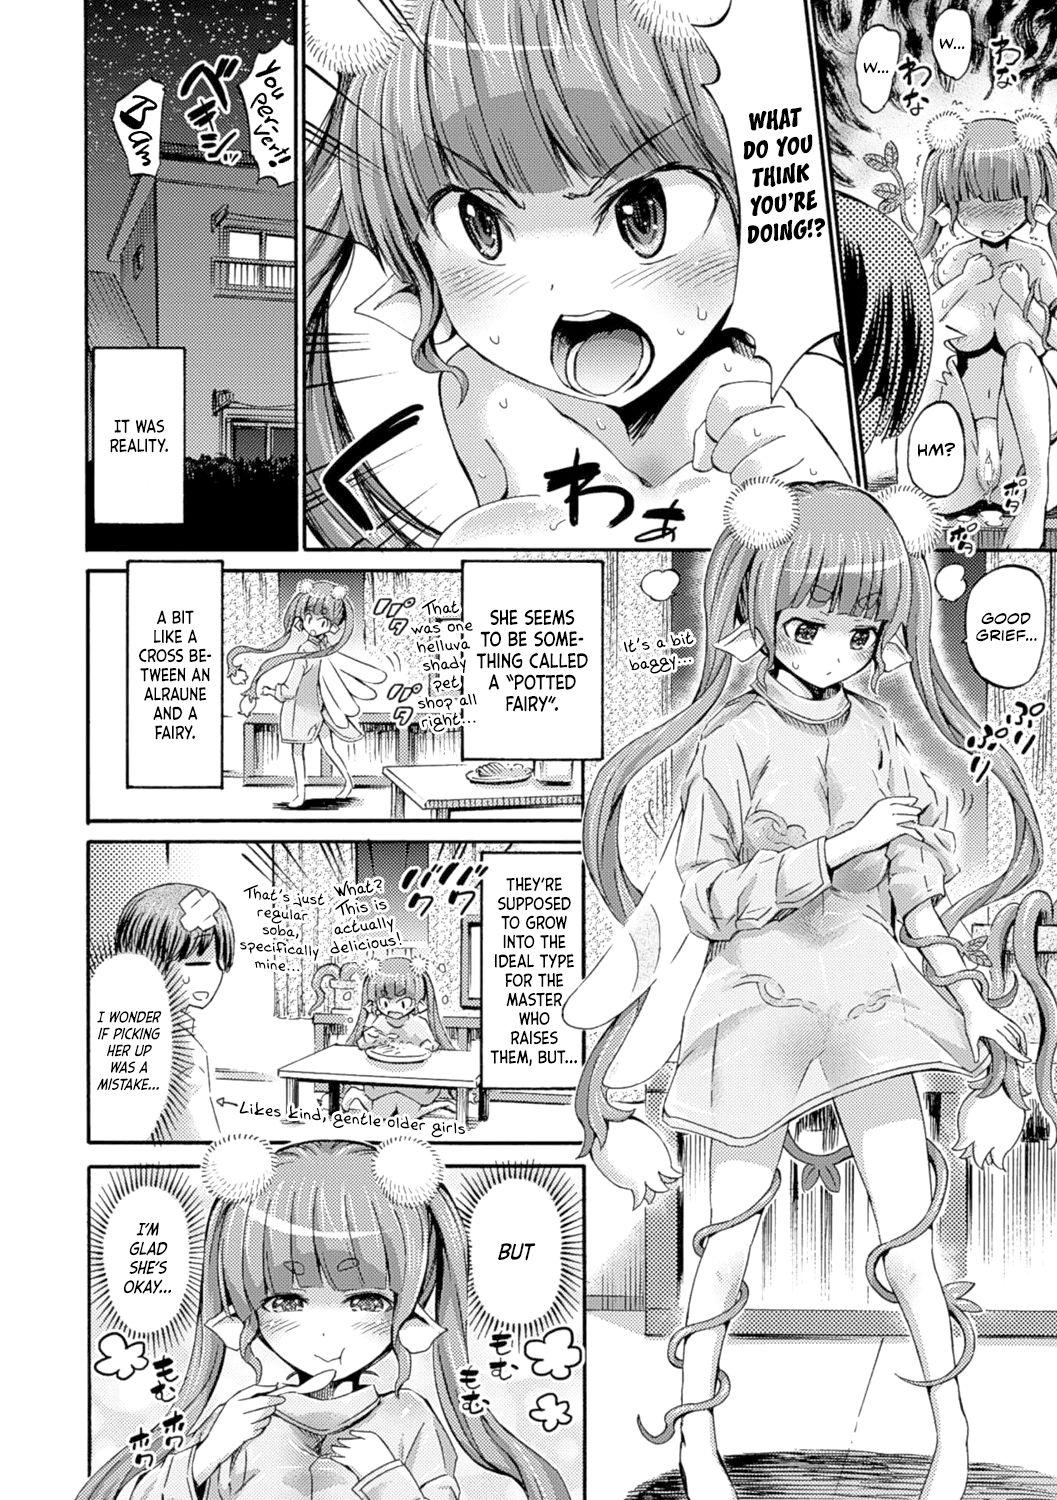 Skinny Hachi no Ue no Flower | Potted Flower Cuckolding - Page 4